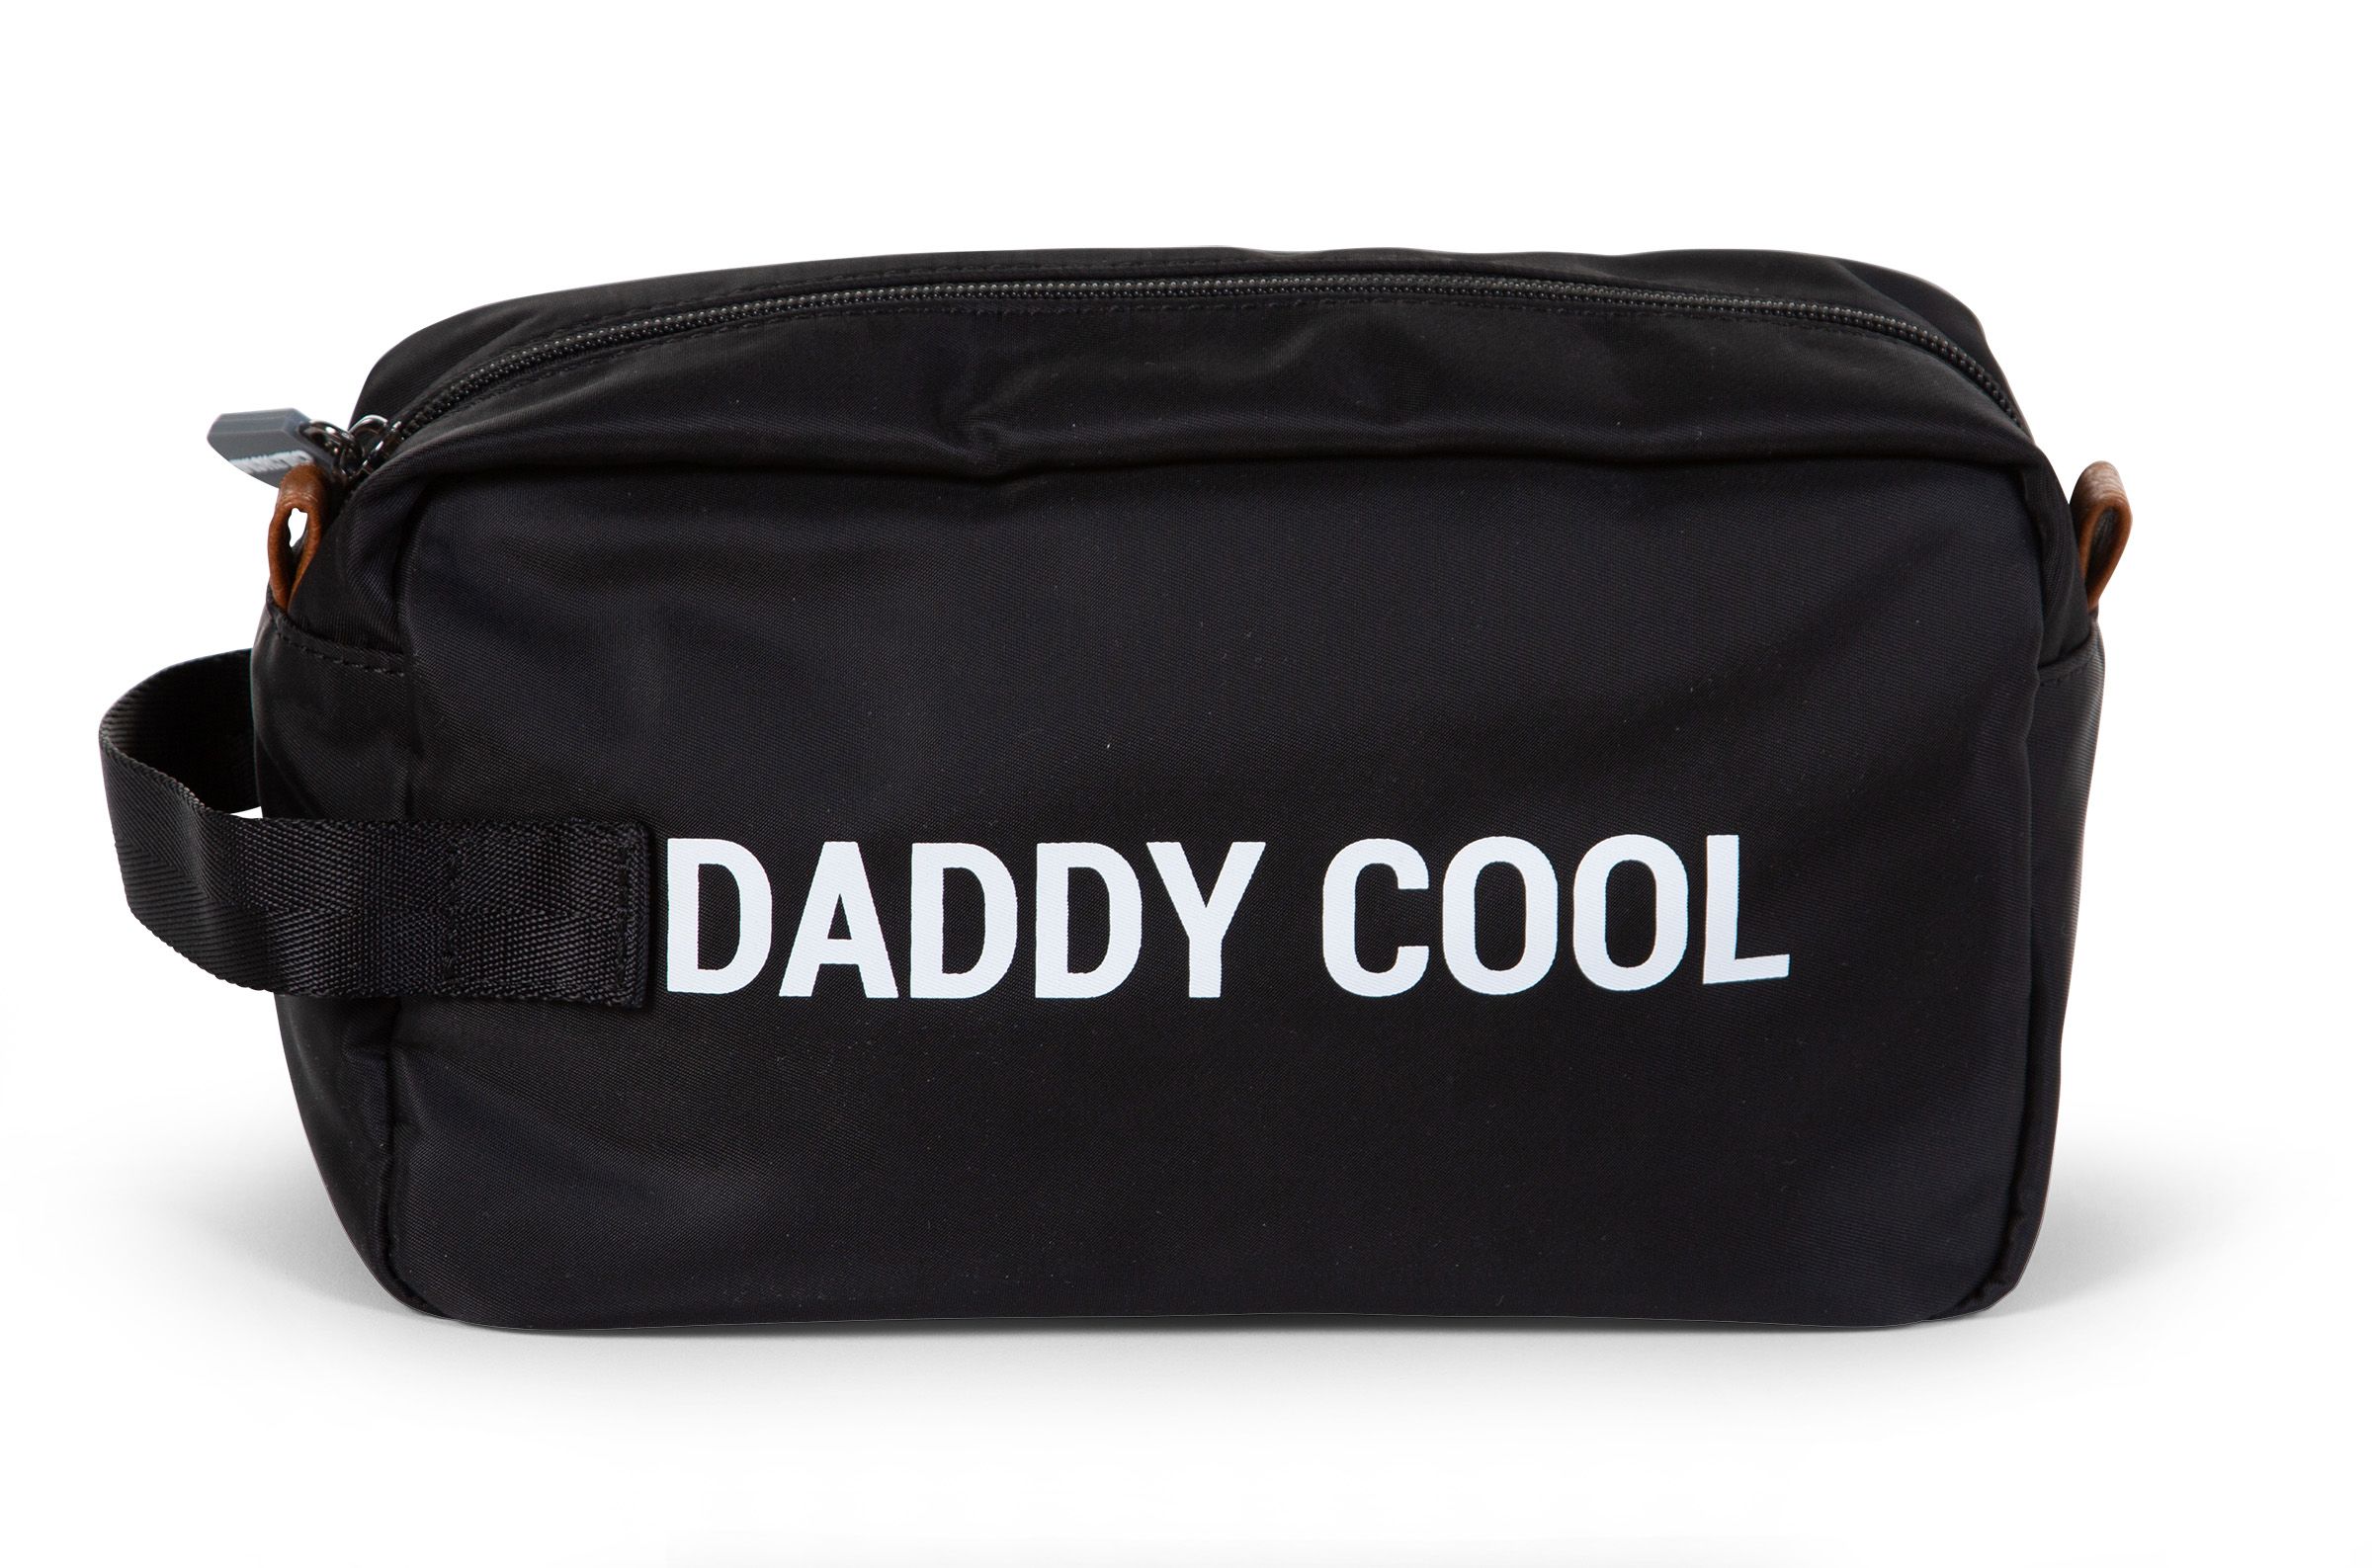 Daddy Cool toiletry bag Black / White - Childhome 